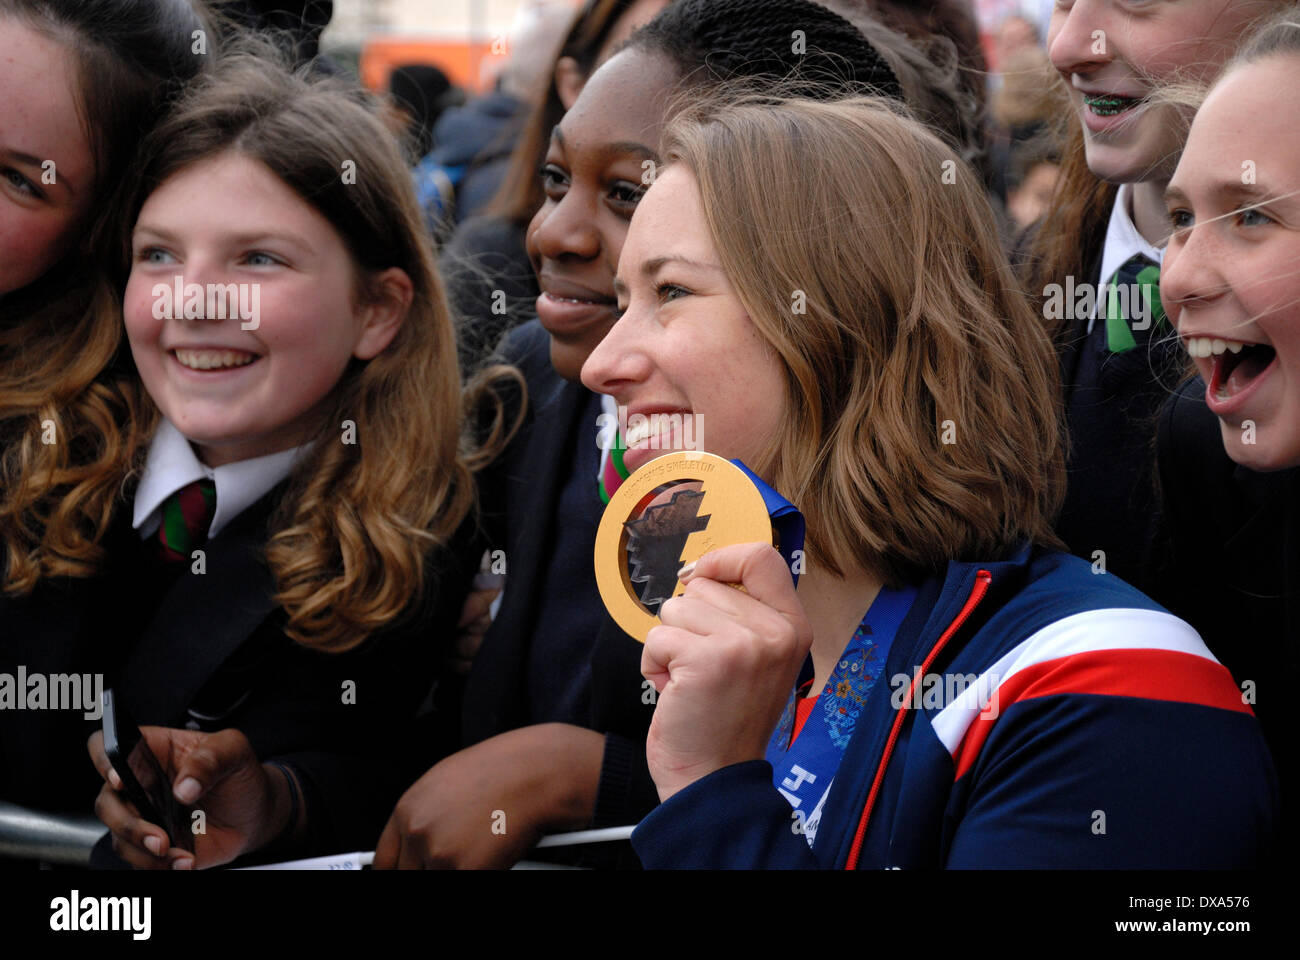 Lizzy Yarnold Victory Parade in Sevenoaks, Kent. 21/03/2014. Winter Olympic gold medal winner Lizzy Yarnold driven from Sevenoaks to her home village of West Kingsdown in Kent in an open-top bus. Stop-off in Blighs Meadow to meet local school children Stock Photo